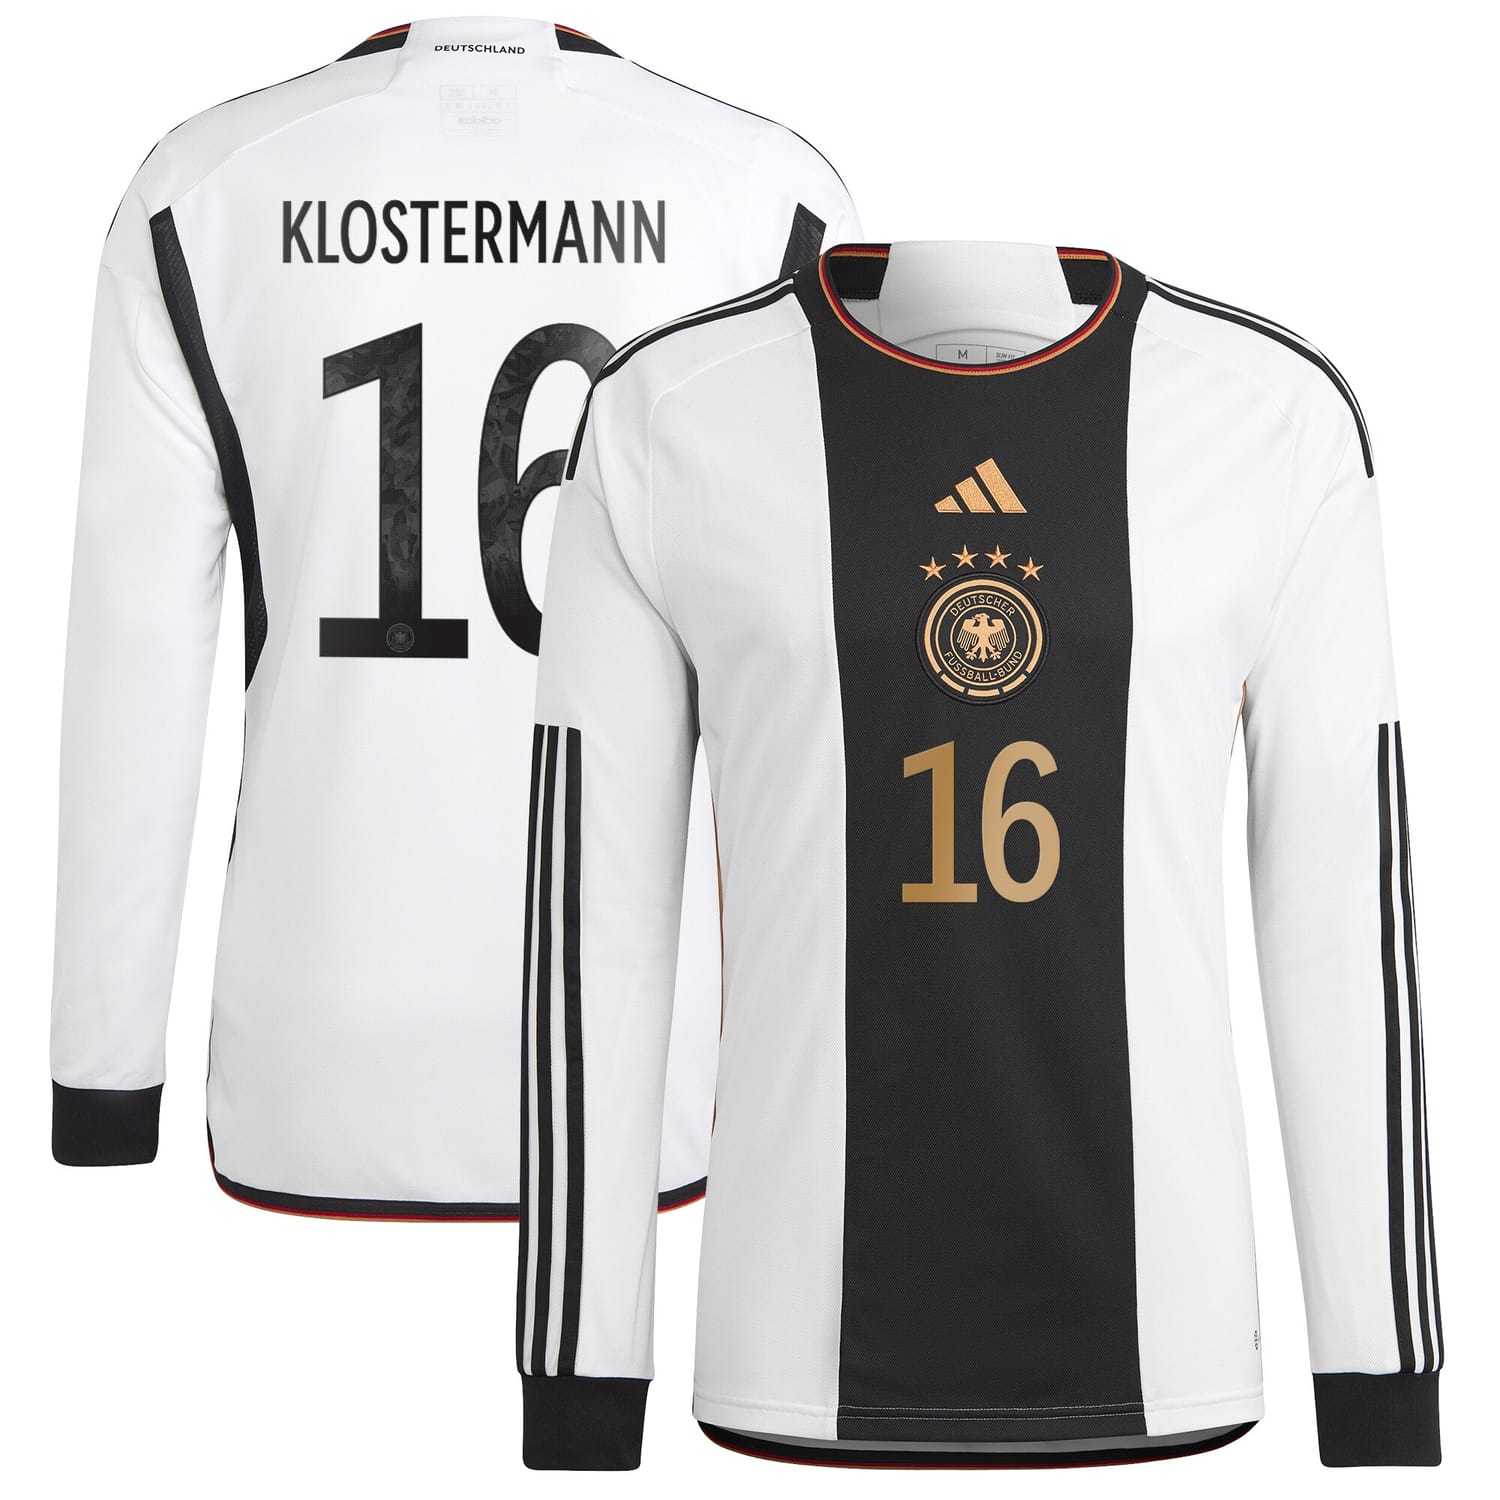 Germany National Team Home Jersey Shirt Long Sleeve player Lukas Klostermann 16 printing for Men